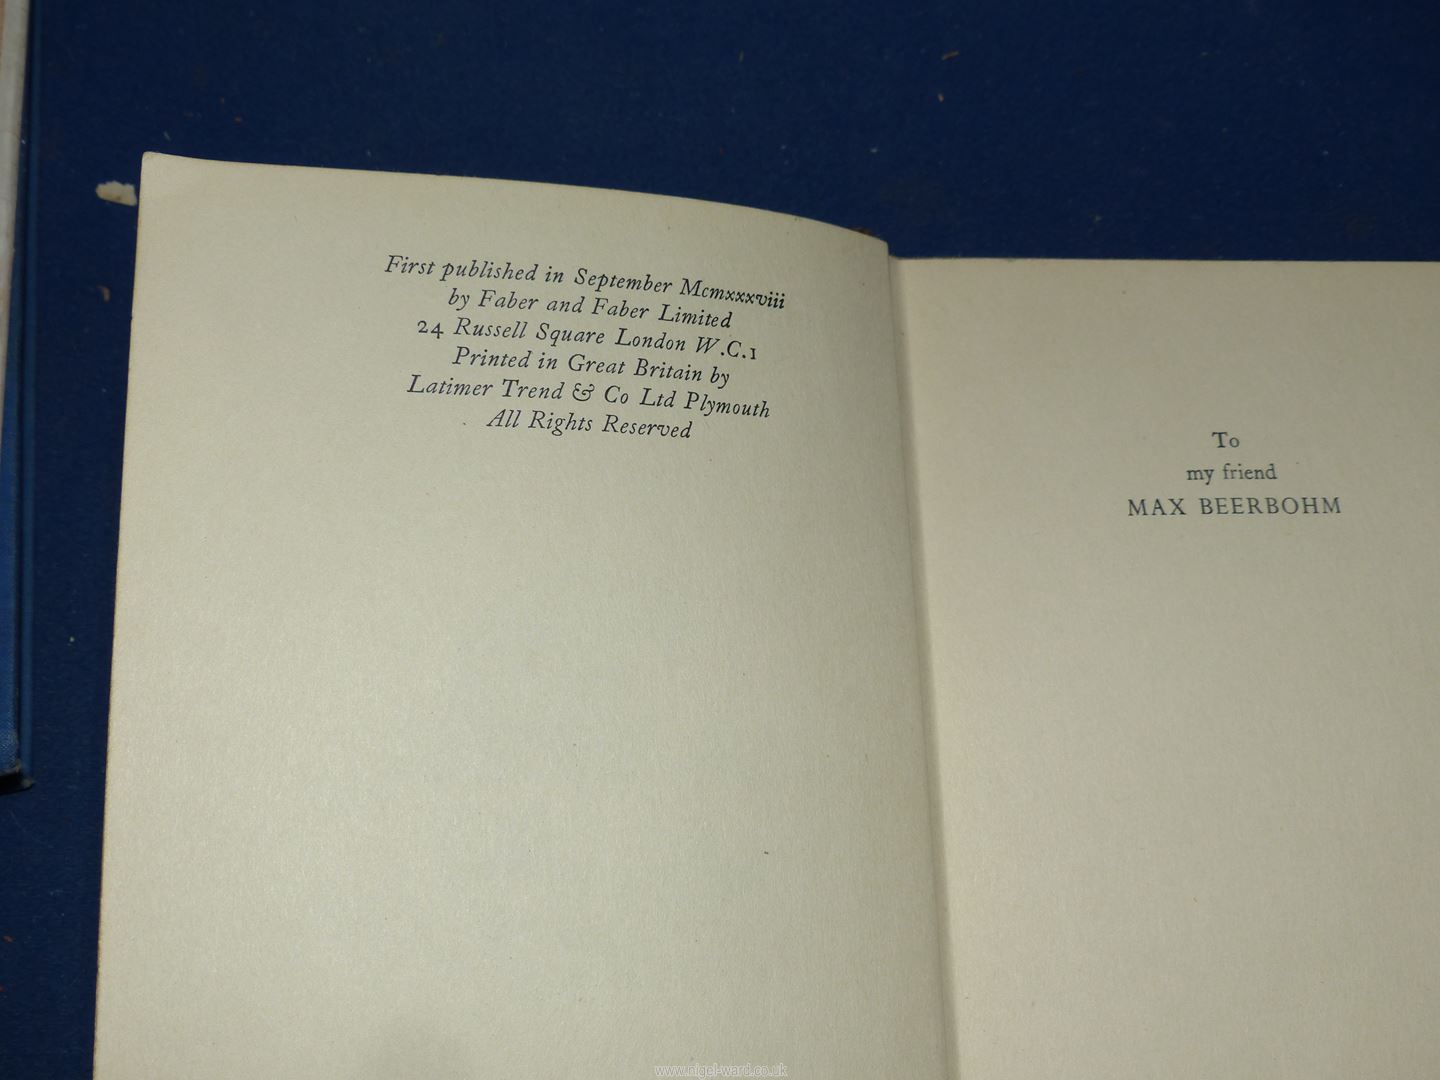 A small collection of works by Siegfried Sassoon including Memoirs of a Fox-Hunting Gentleman - Image 22 of 29